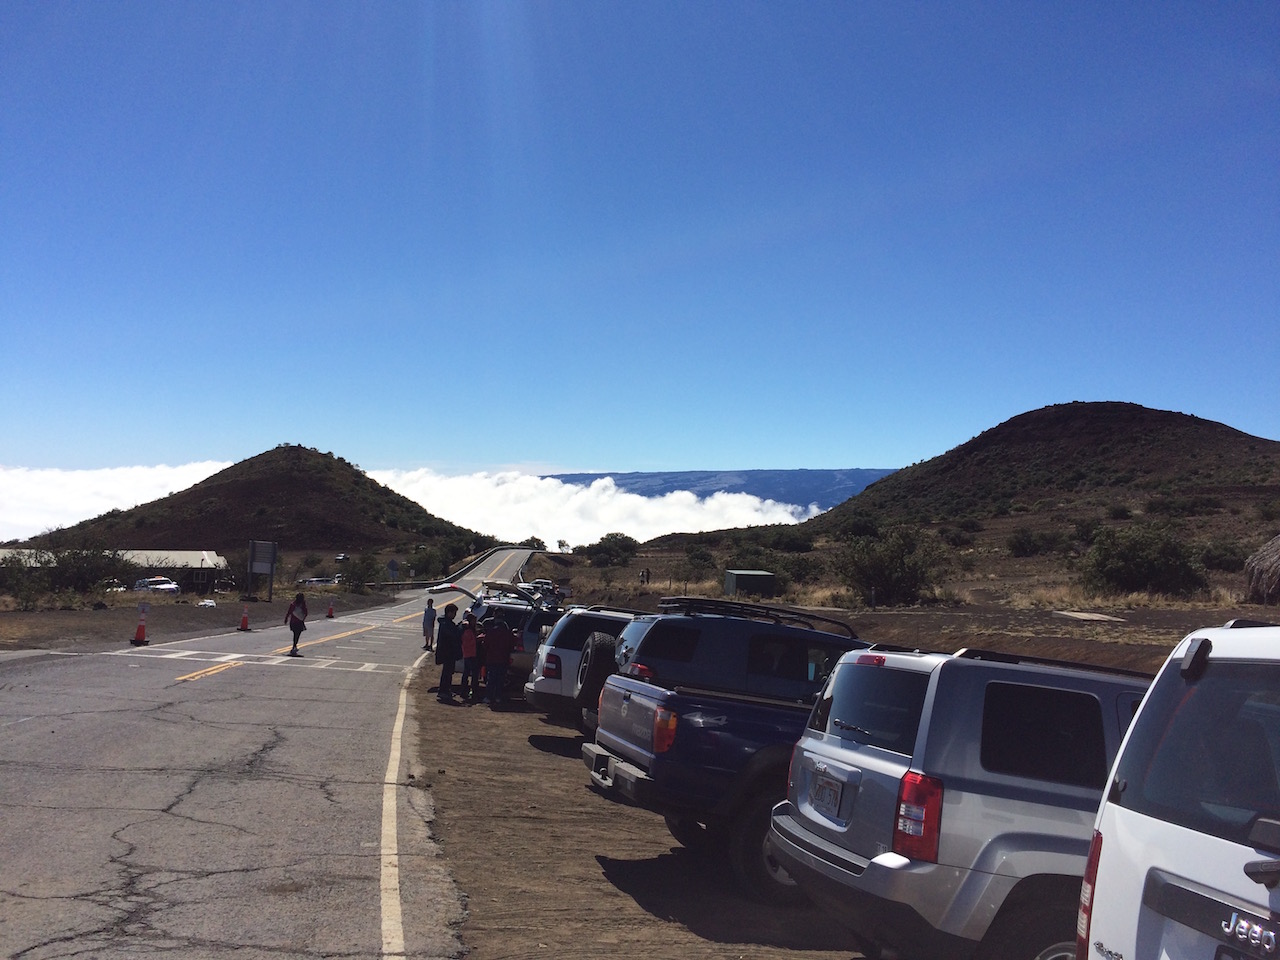 Parking next to the Mauna Kea Visitor's Center by Judy K. Walker